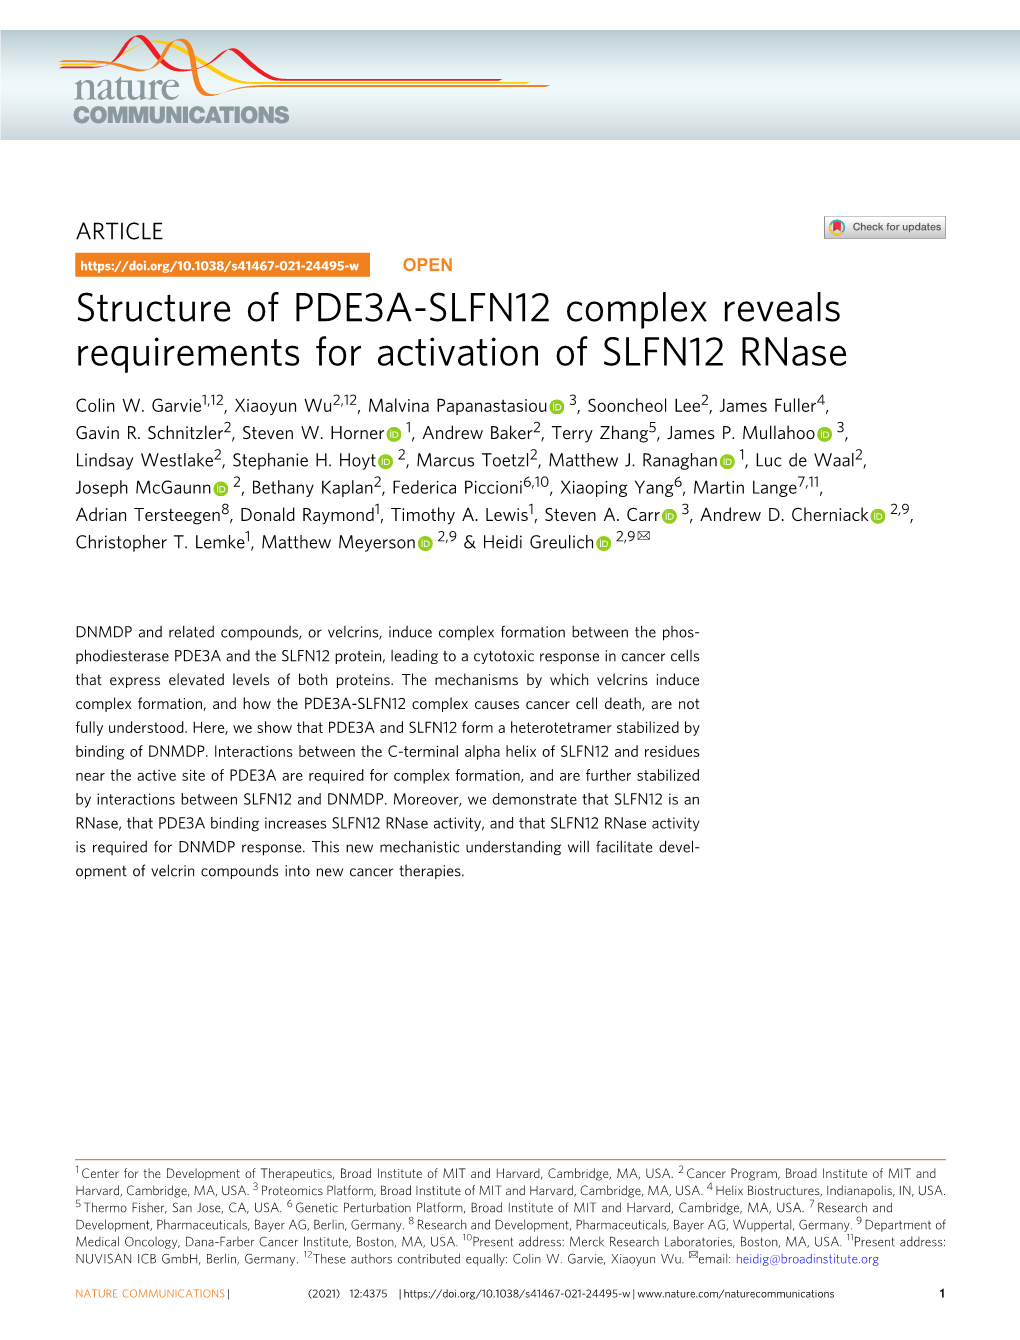 Structure of PDE3A-SLFN12 Complex Reveals Requirements for Activation of SLFN12 Rnase